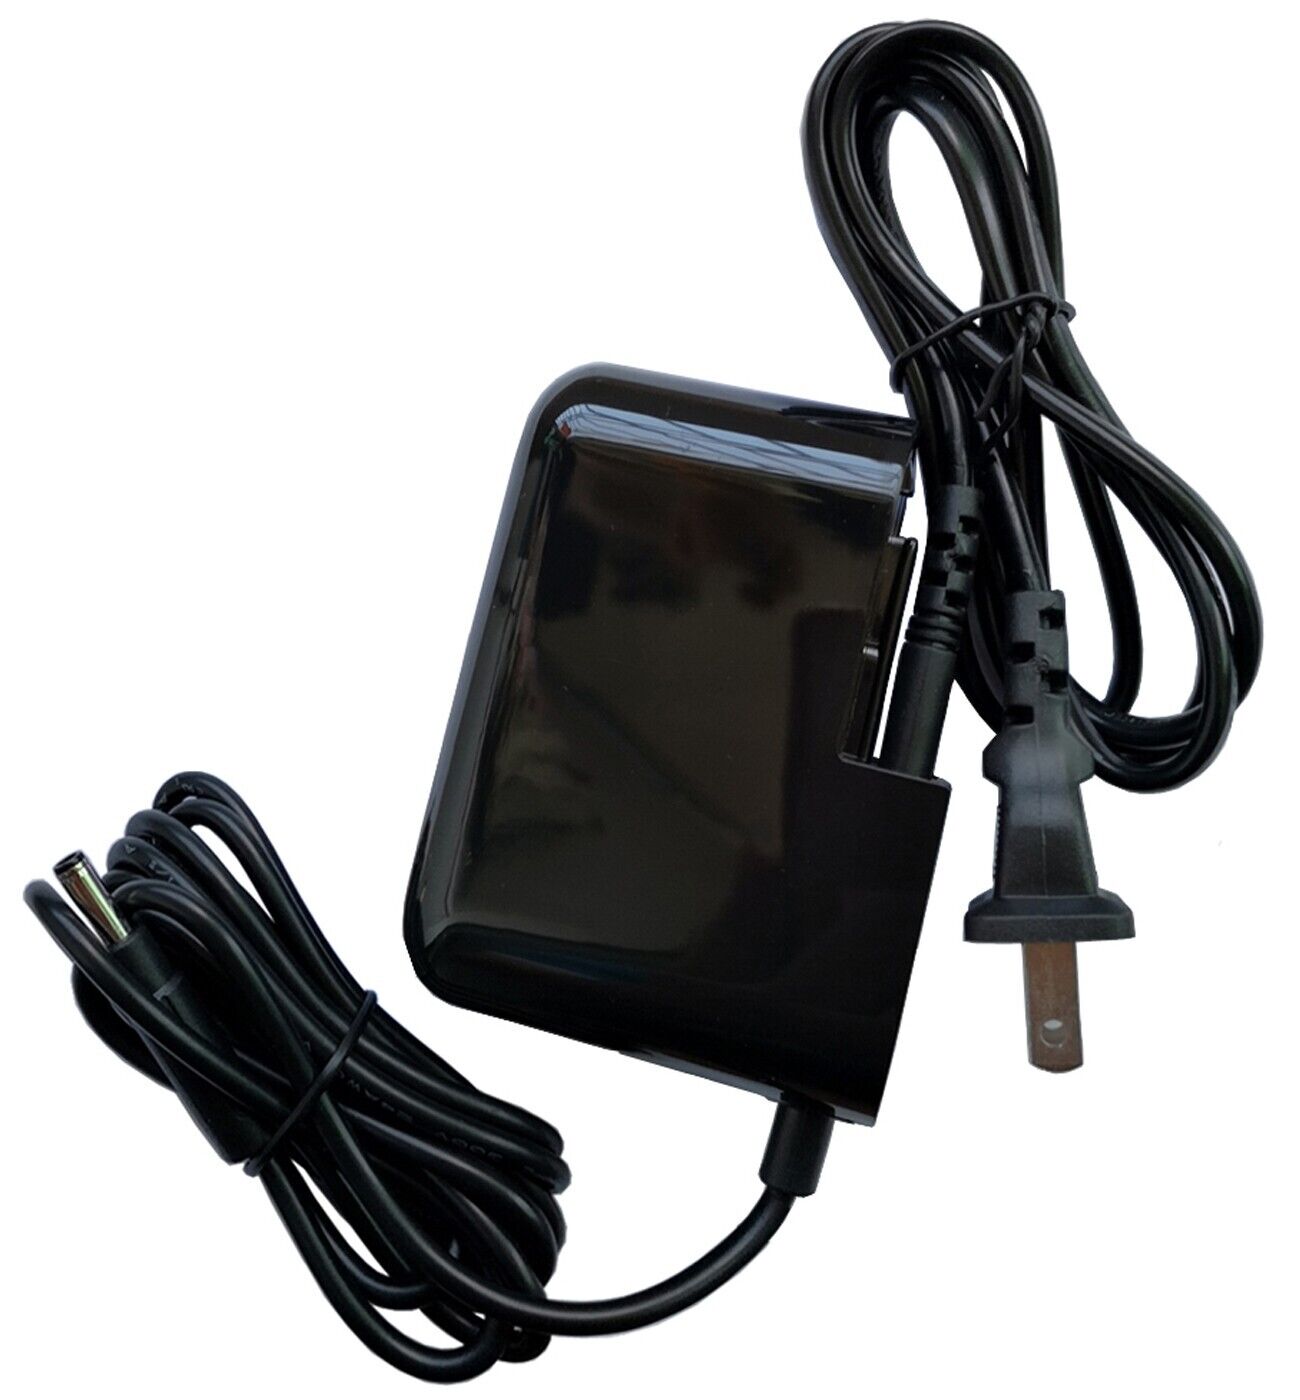 *Brand NEW* AC Adapter For Eureka NEC-380 25.2V 0.8A Li-ion Vacuum Cleaner Power Supply